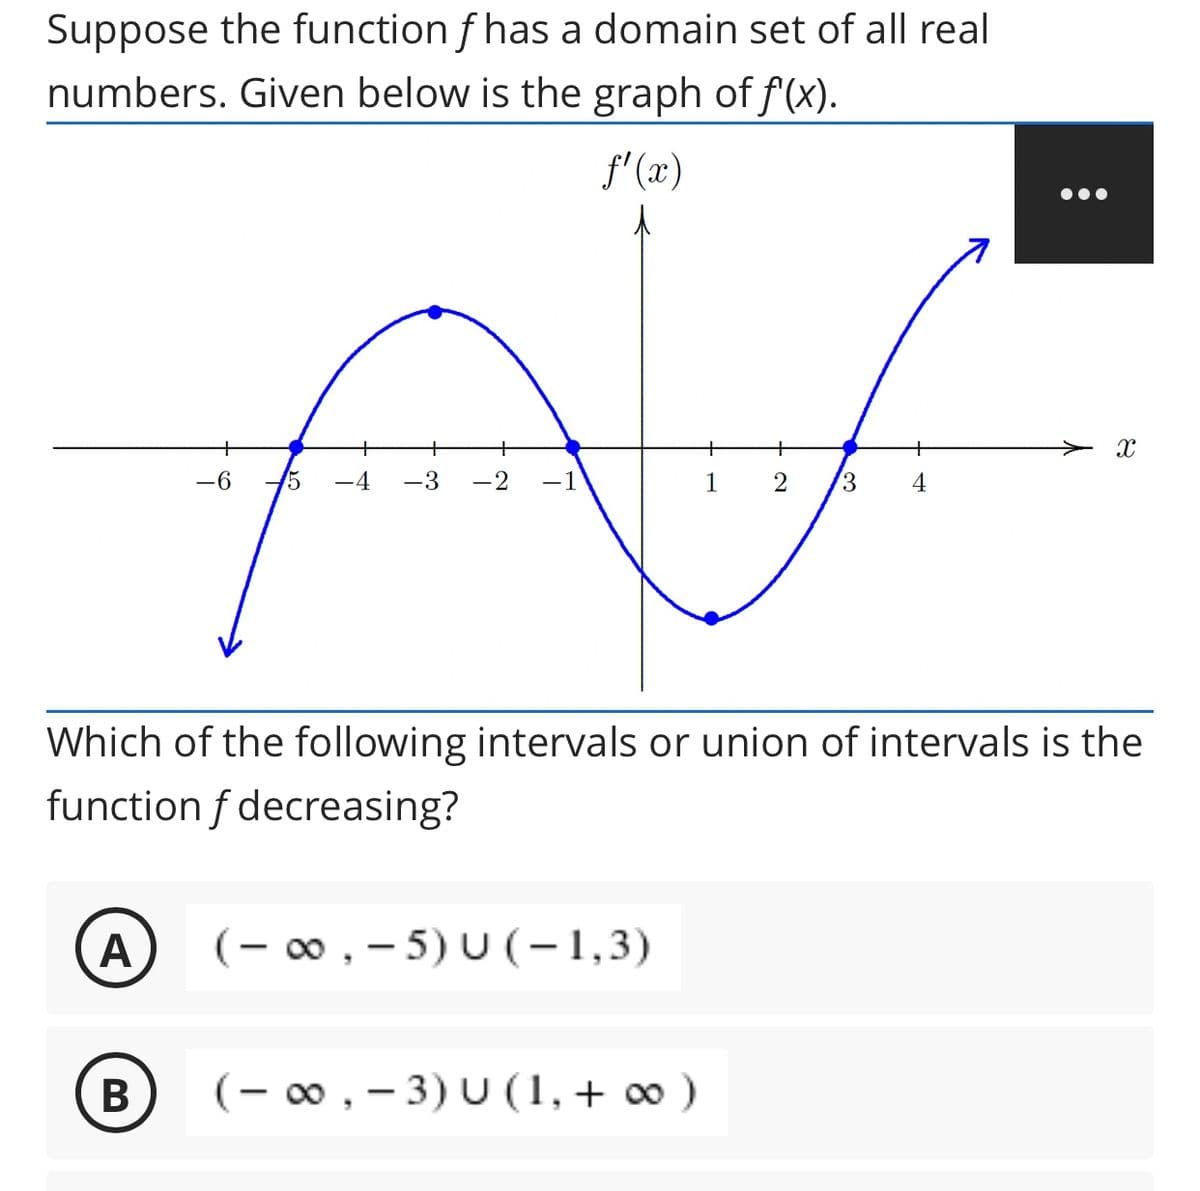 Suppose the function f has a domain set of all real
numbers. Given below is the graph of f(x).
f'(x)
-6°
4
-3
-2
-1
1
2
3
Which of the following intervals or union of intervals is the
function f decreasing?
A
(- 00 , - 5) U (-1,3)
В
(- 0, - 3) U (1,+ ∞ )
